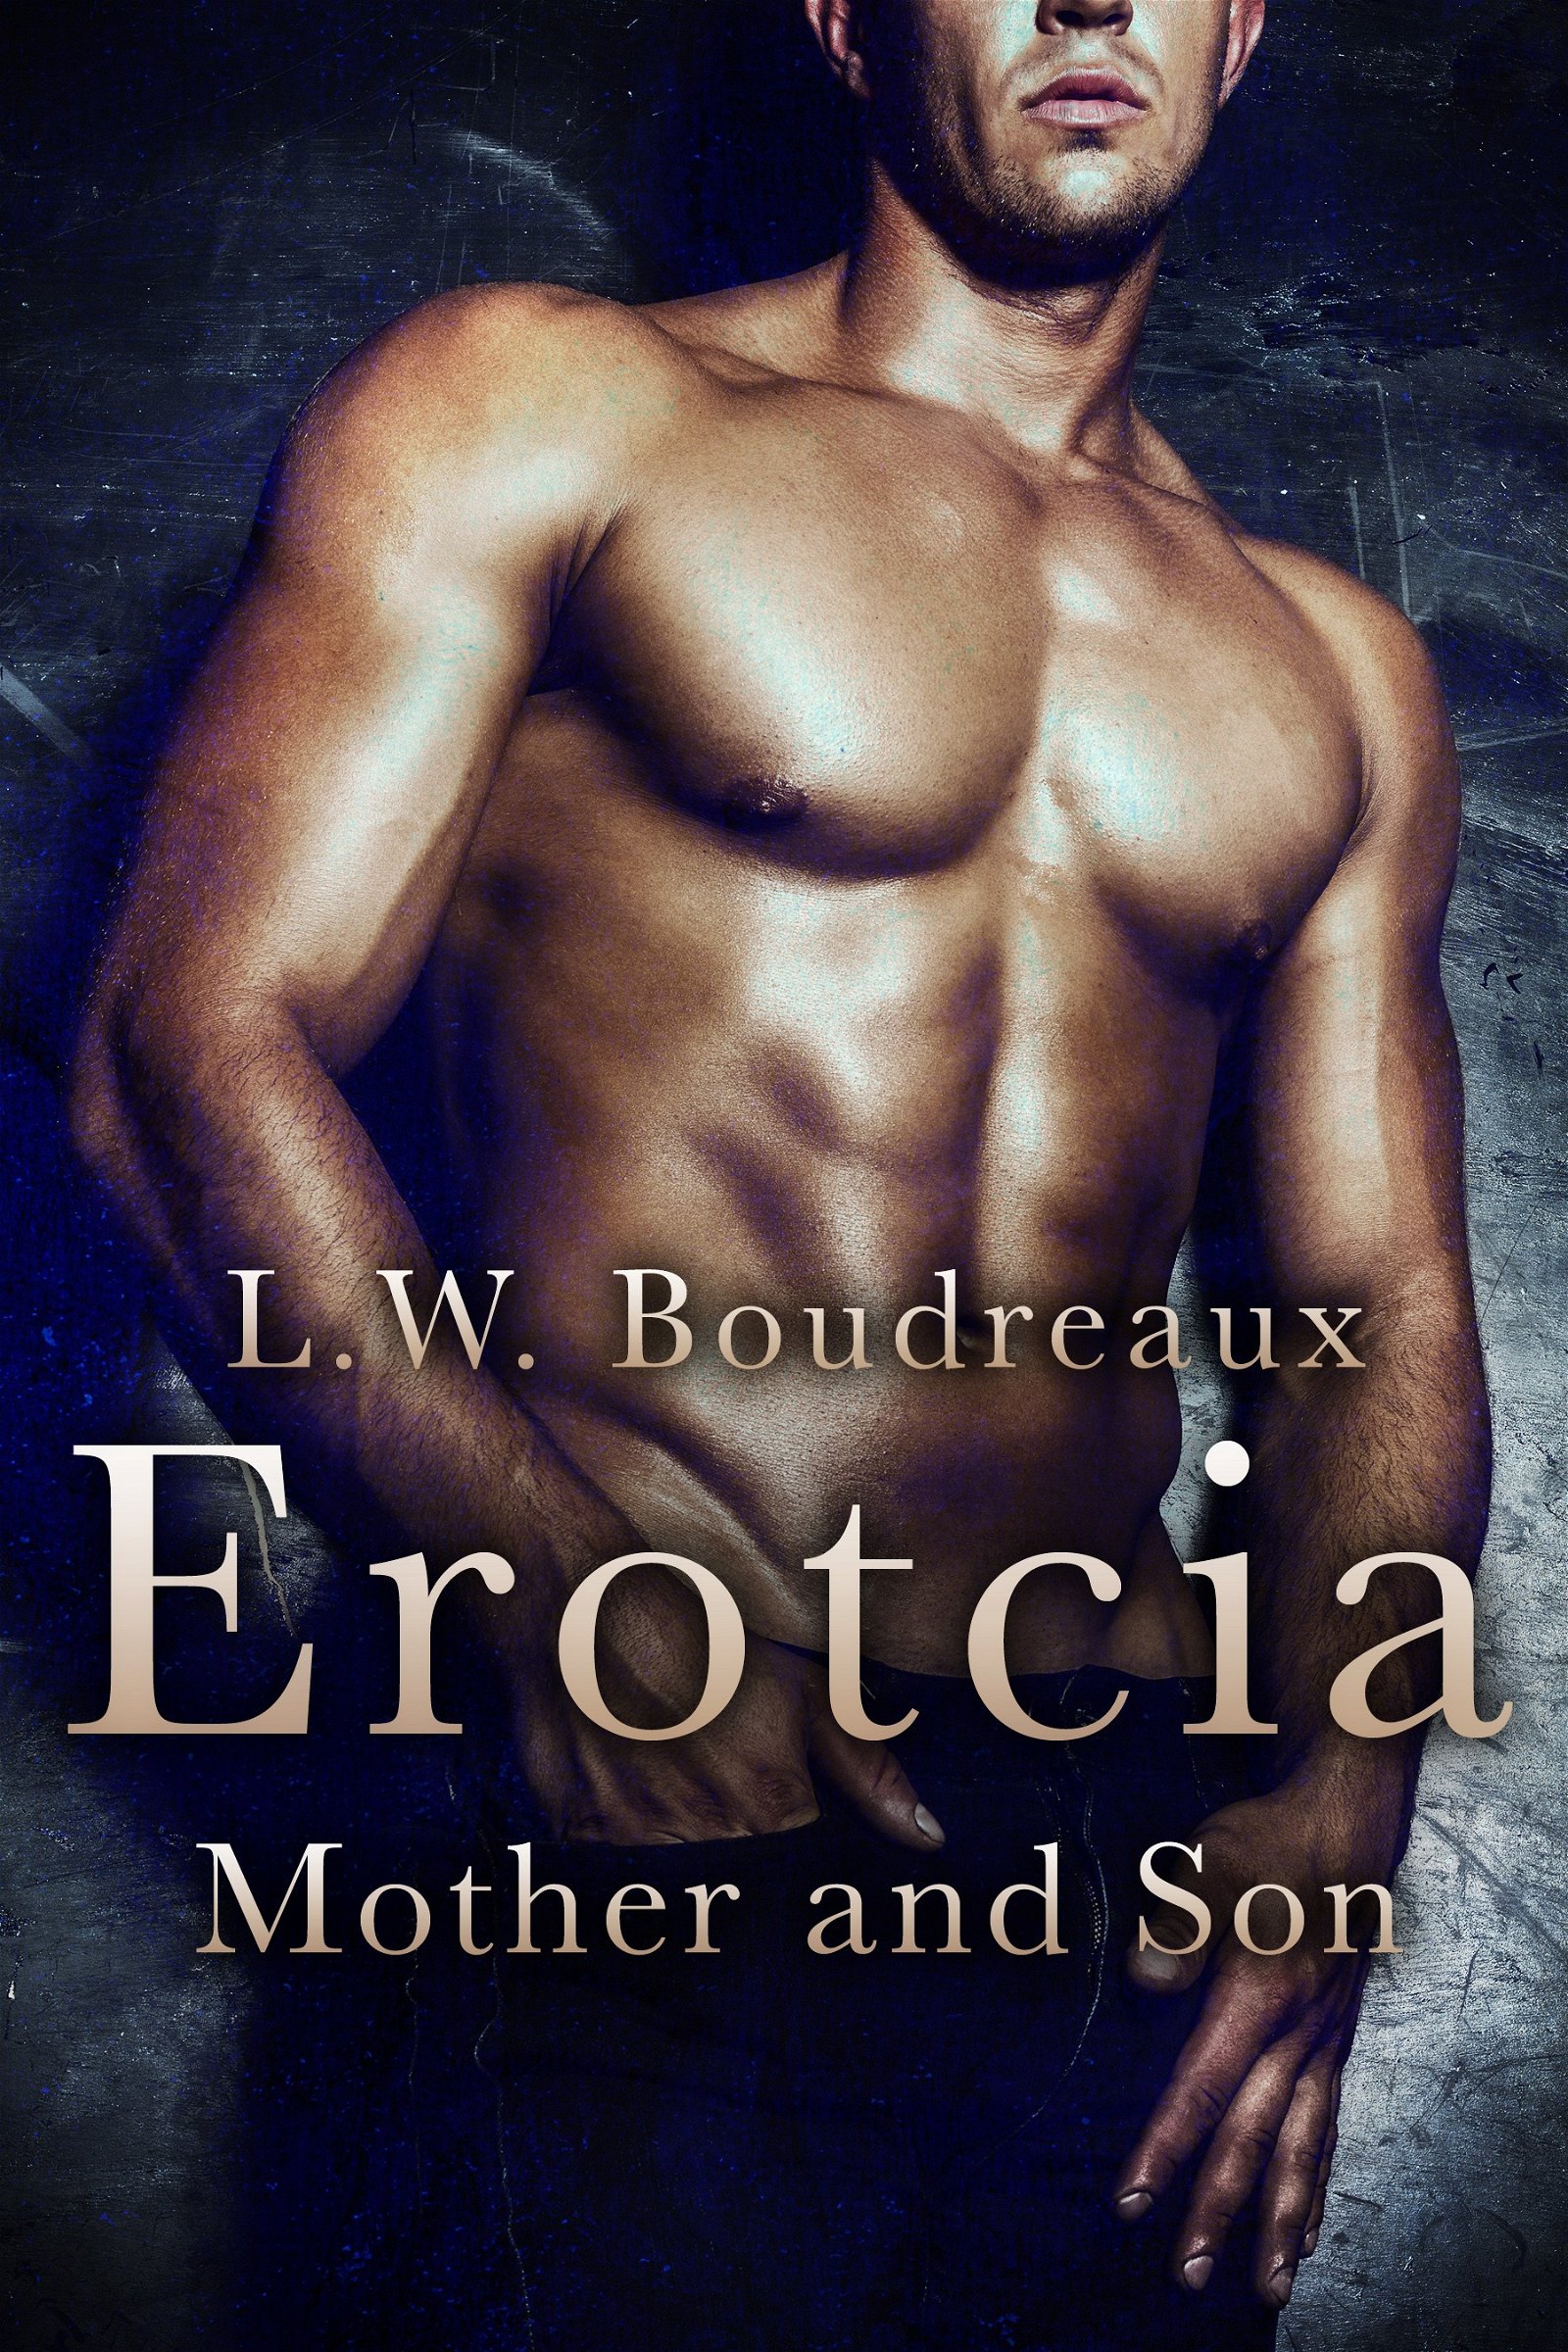 Photo by erotcia with the username @erotcia, who is a verified user,  May 3, 2020 at 4:23 AM. The post is about the topic Erotcia: Erotica books by LW Boudreaux and the text says 'SHARE IF YOU LOVE MILFS!!!

Erotica Mother and Son. Free taboo download at https://www.erotcia.com/taboo/

Check out the Erotcia blog for this and other free books, including Stepdaddy, Spanking Part I, and Alien Romance.

That's FOUR FREE BOOKS and over..'